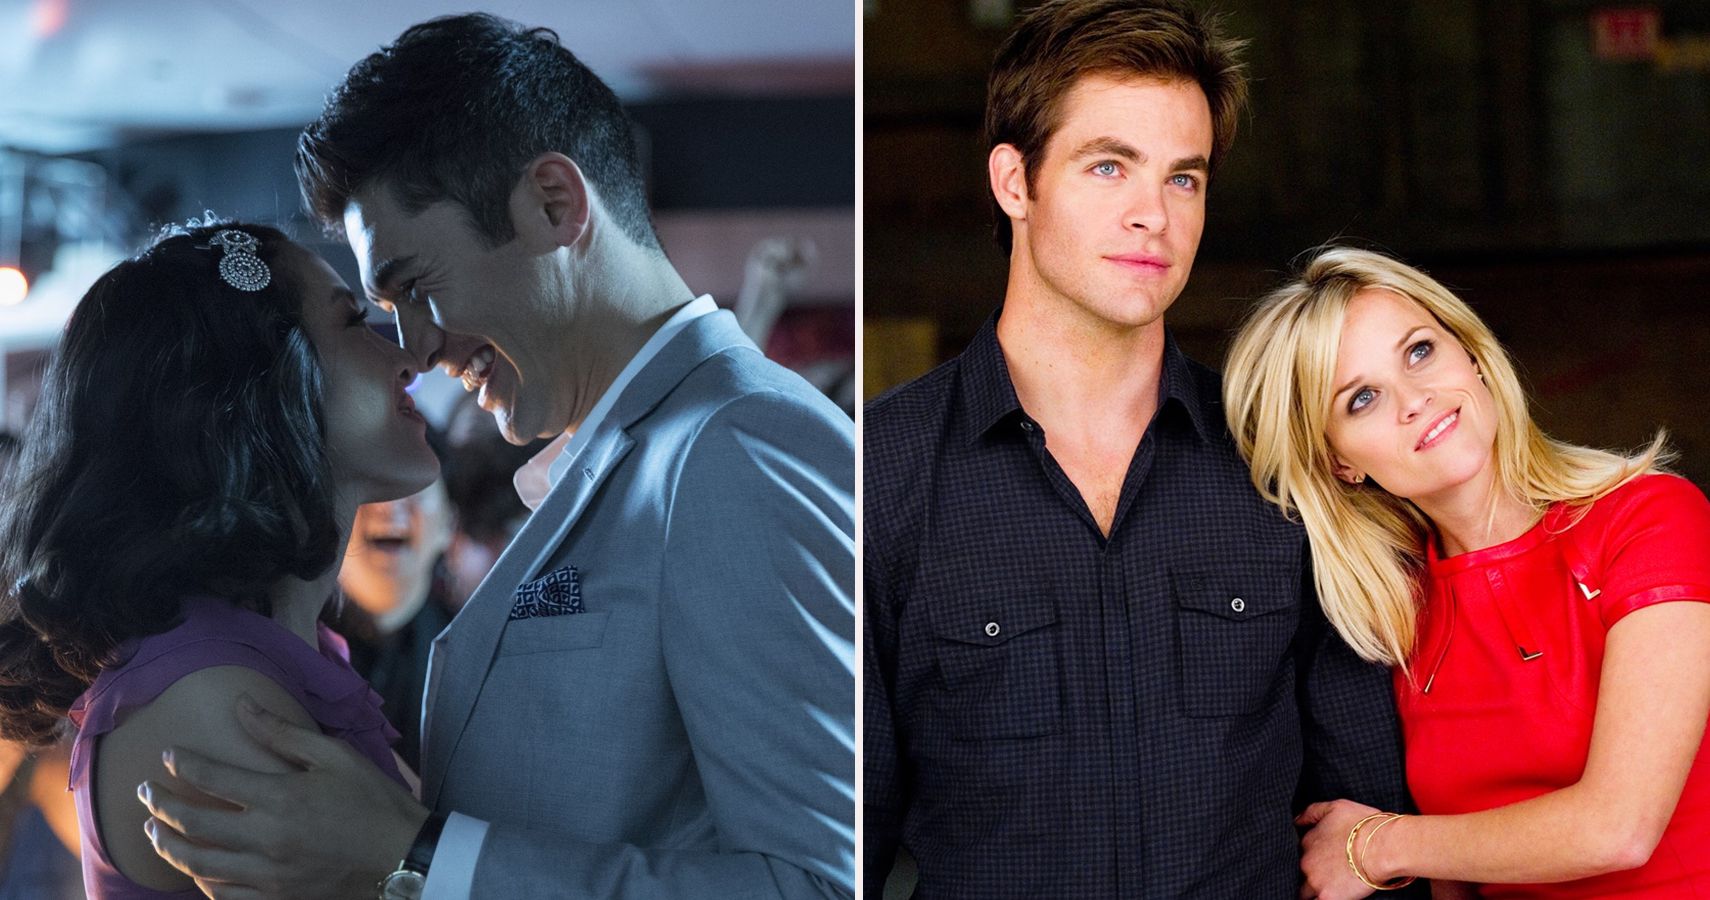 10 Of The Best RomComs From The Past 10 Years